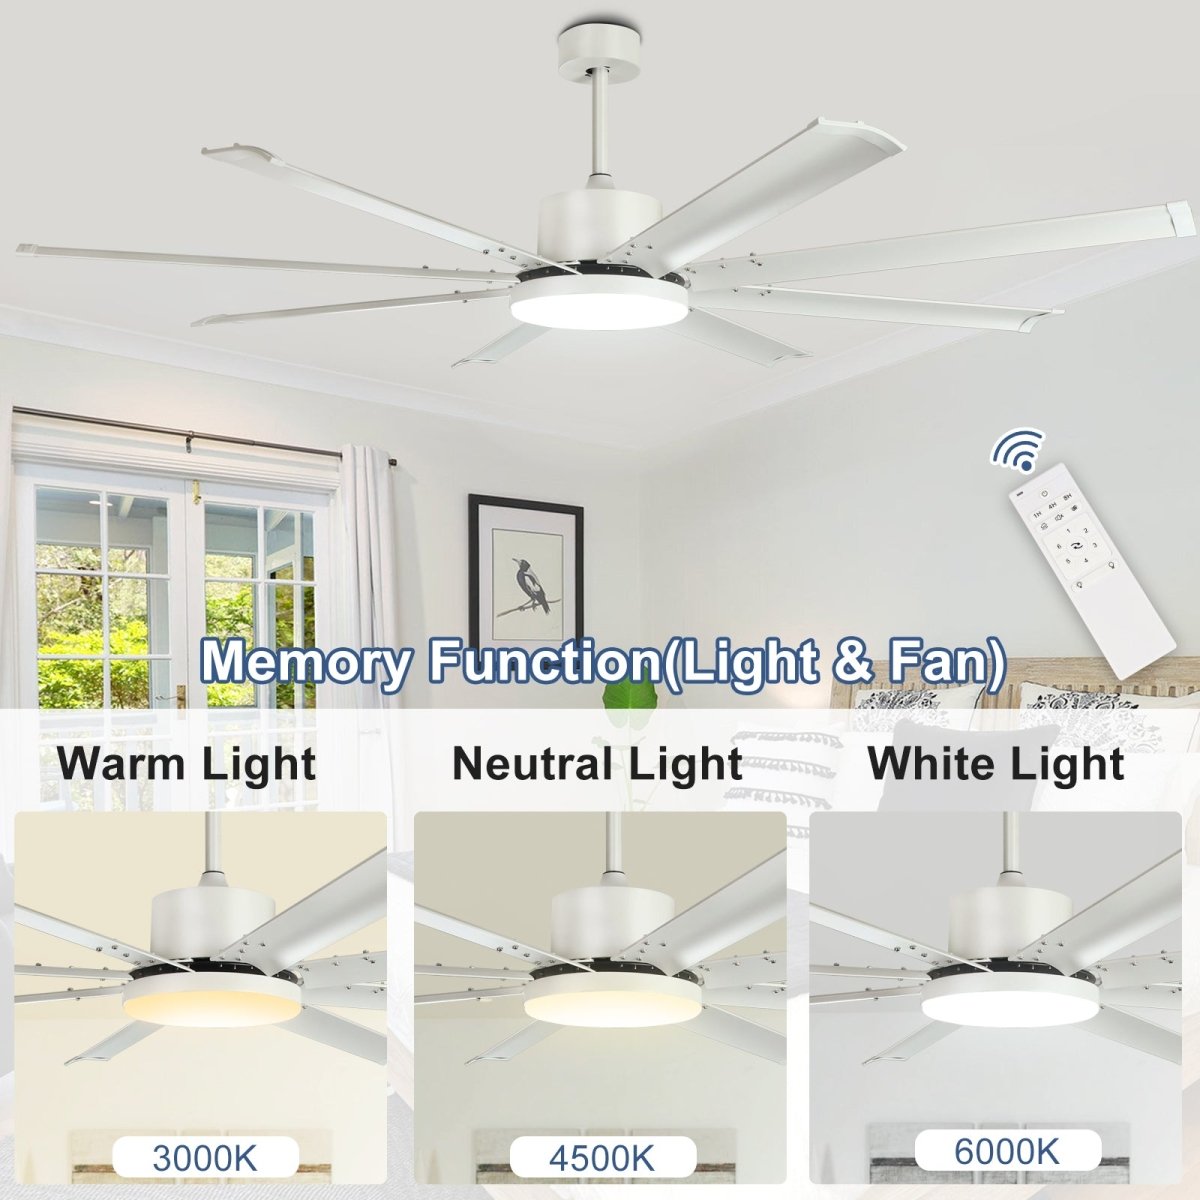 80 Inch Ceiling Fans with Lights and Remote, White Large Ceiling Fan, 6-Speed 8 Aluminum Reversible Blades DC Motor, Industrial Ceiling Fan for Kitchen Living Room Playroom Indoor/Outdoor - WS-FPZ58-24C-8-W 3 | DEPULEY